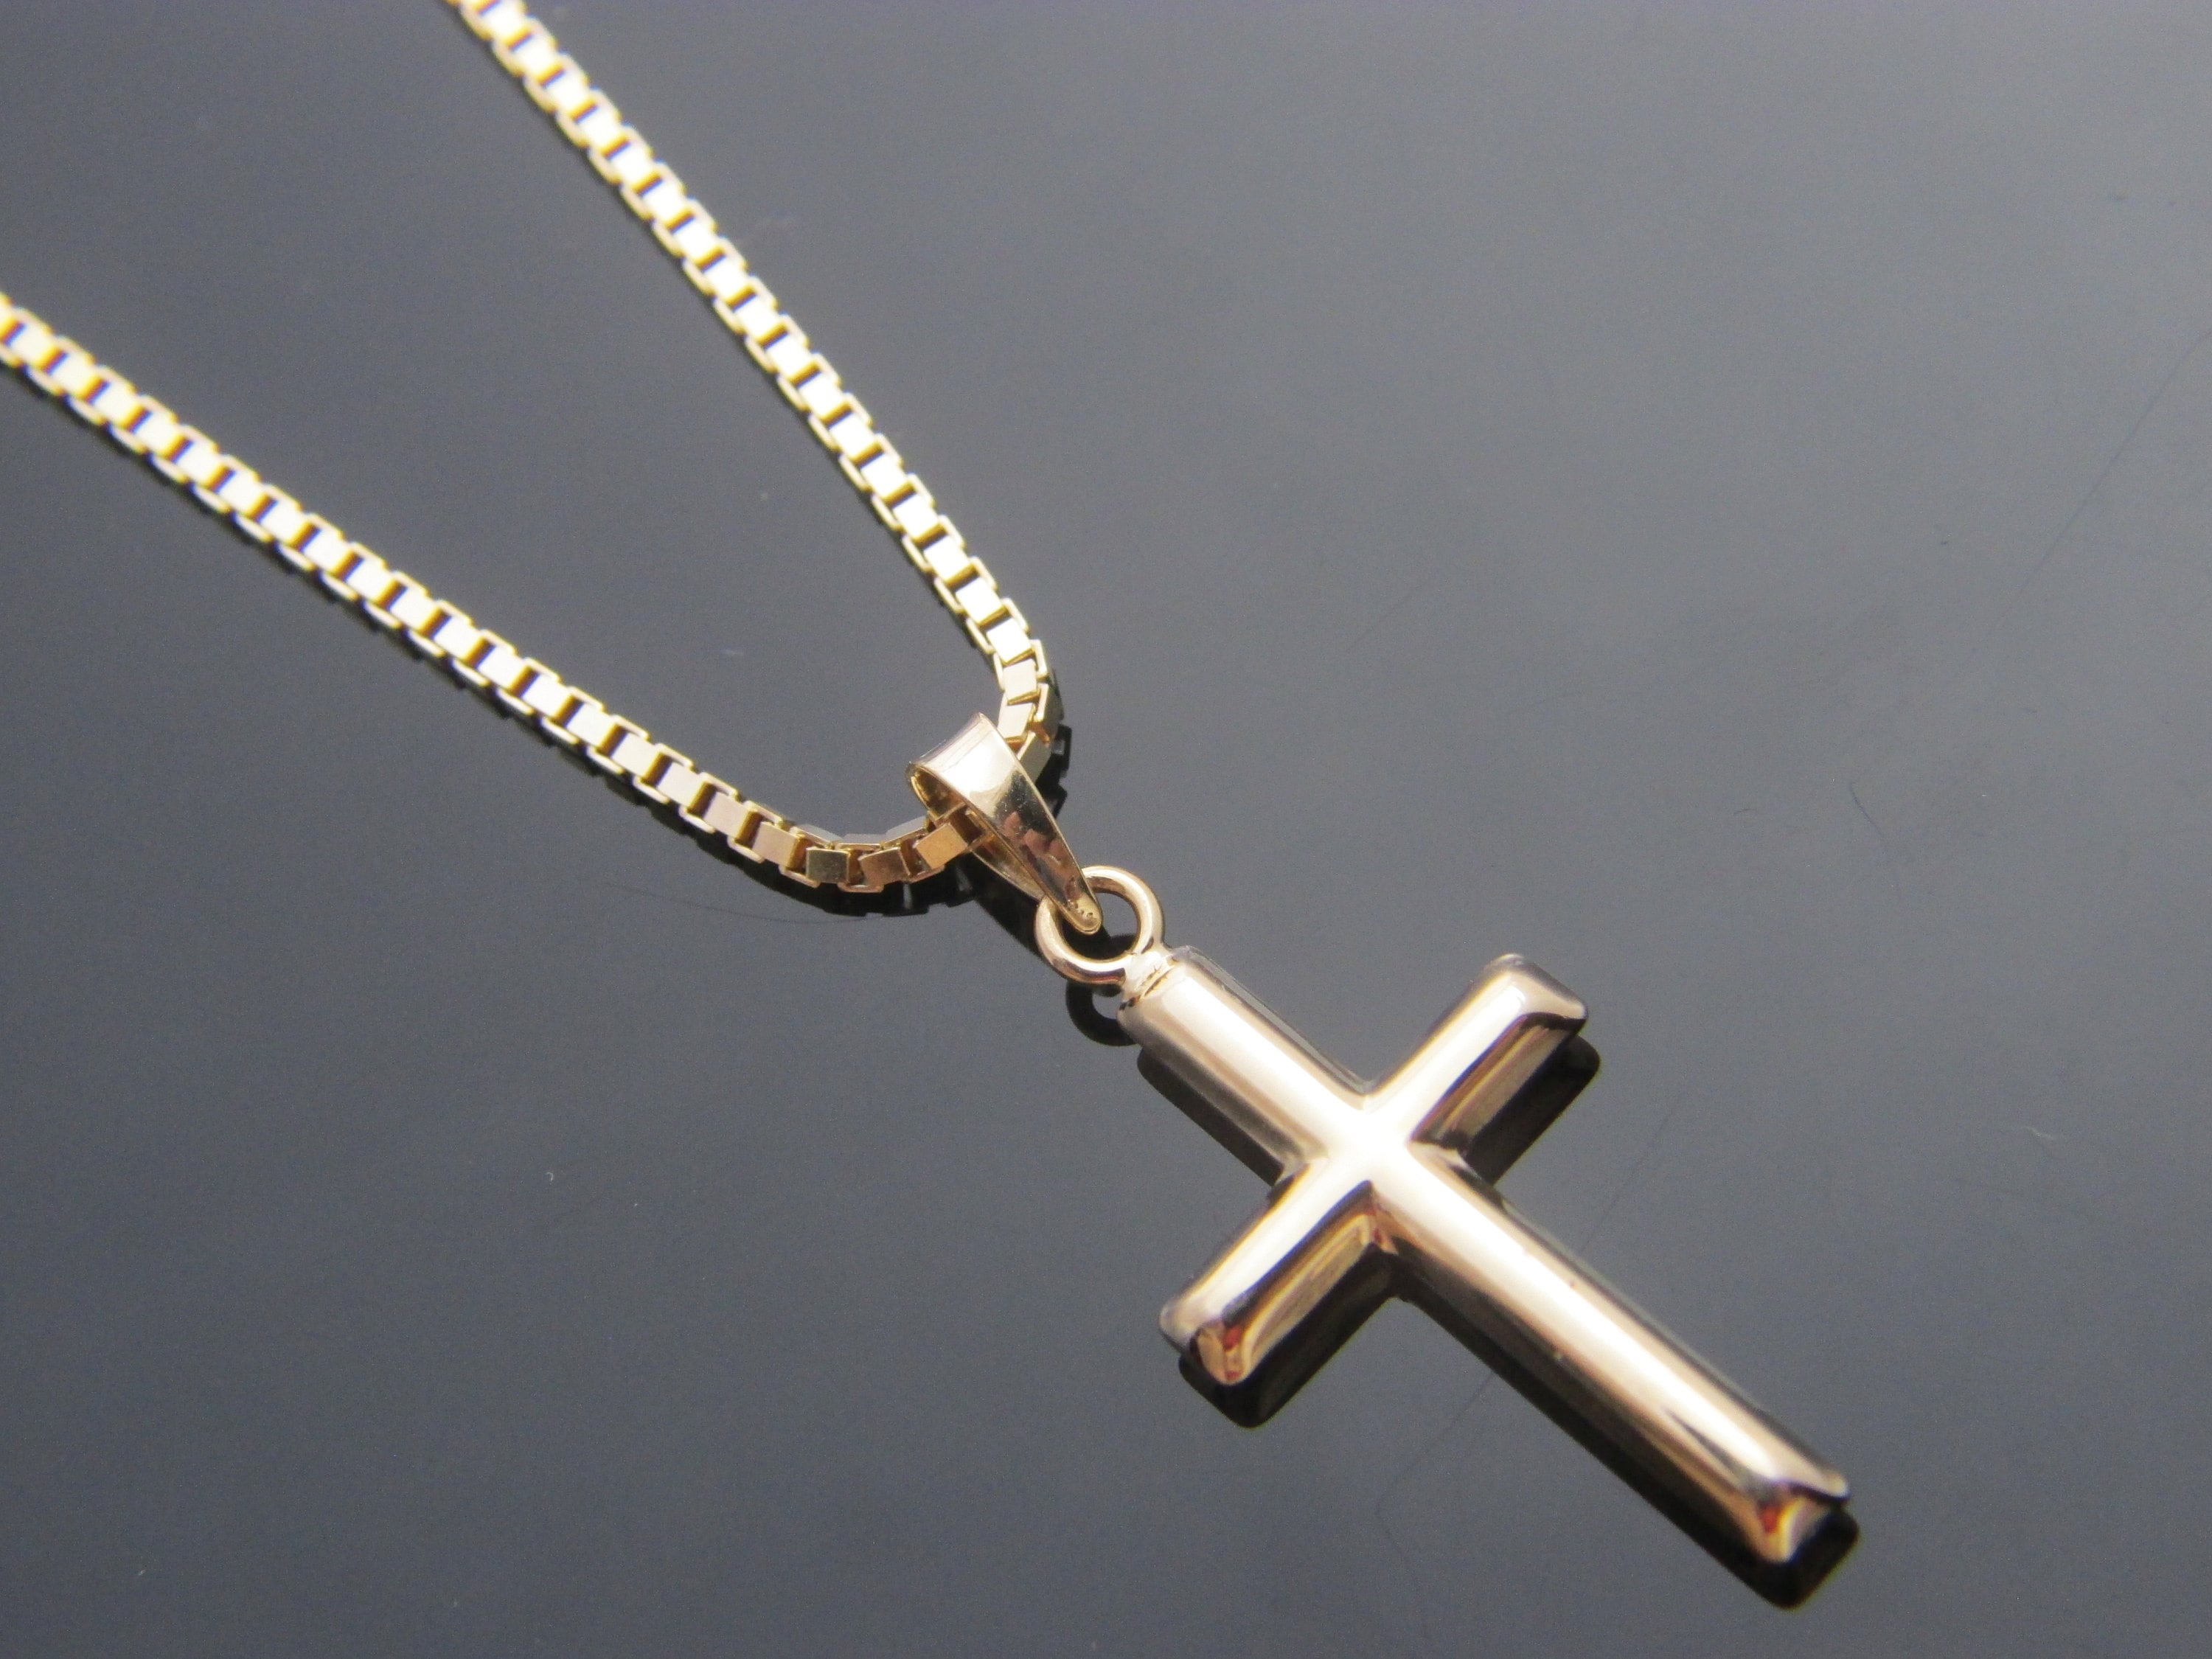 Dropship Cross Necklace For Men Women Stainless Gold Layered Rope Chain  Cross Pendant Necklace Simple Gifts Chain Necklace 16-26 Inches Chain to  Sell Online at a Lower Price